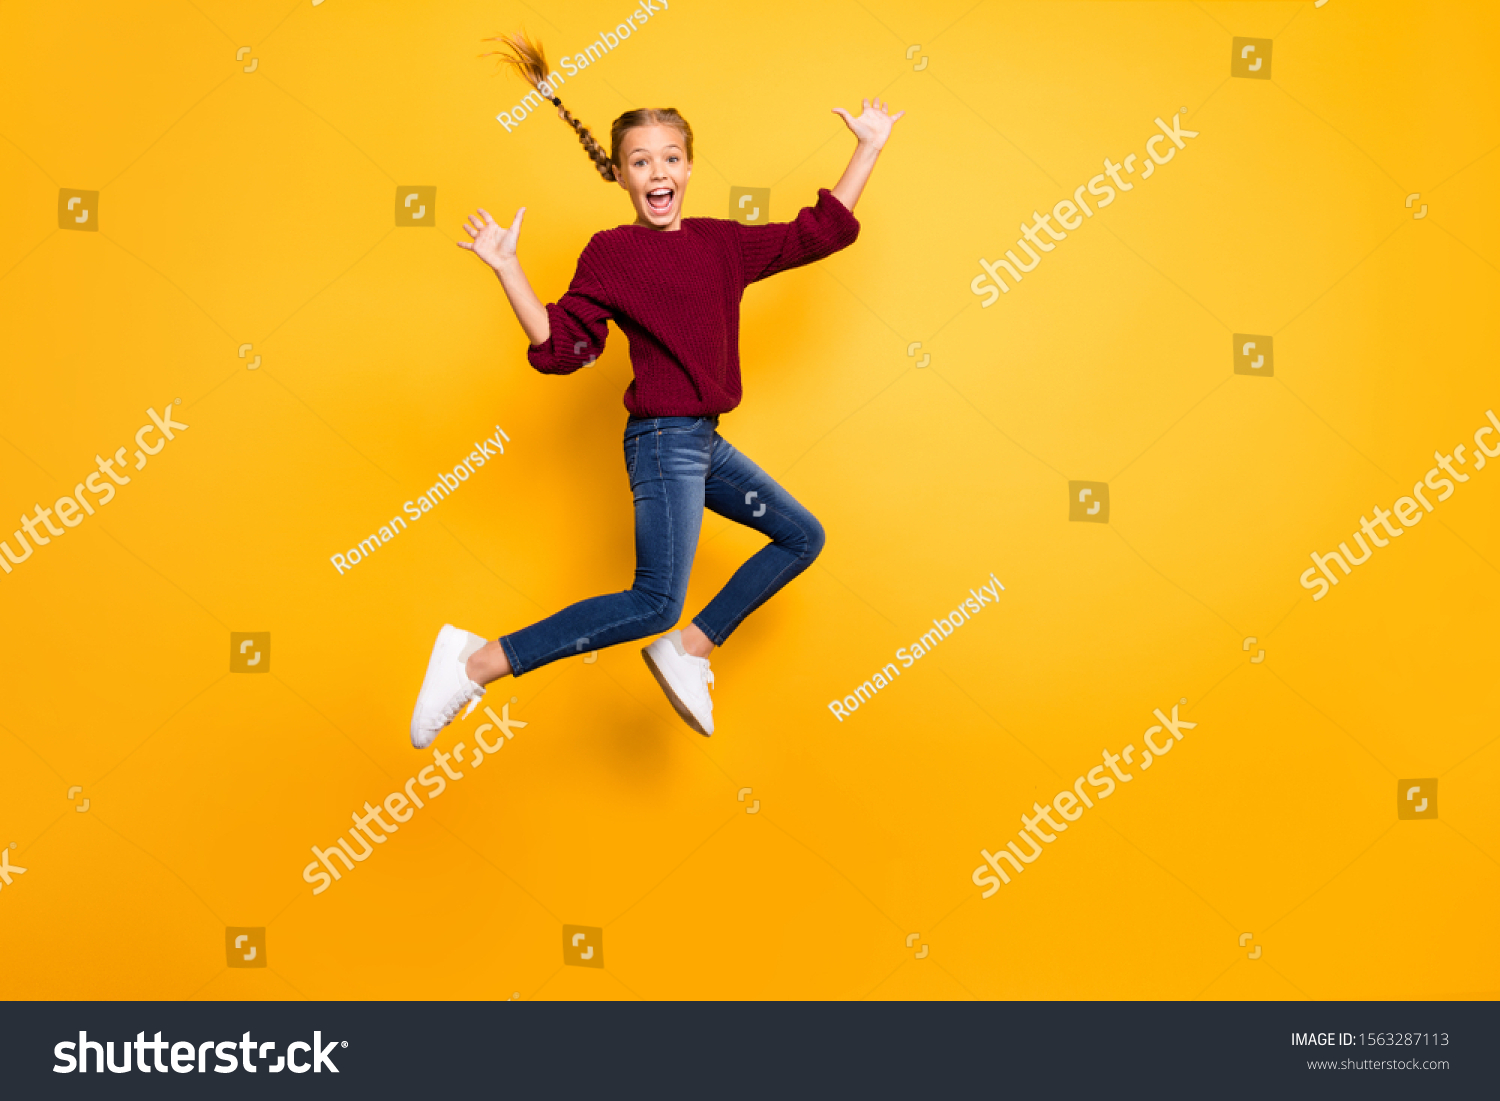 Full length body size view of her she nice attractive lovely crazy overjoyed glad girlish cheerful pre-teen girl jumping having fun isolated on bright vivid shine vibrant yellow color background #1563287113